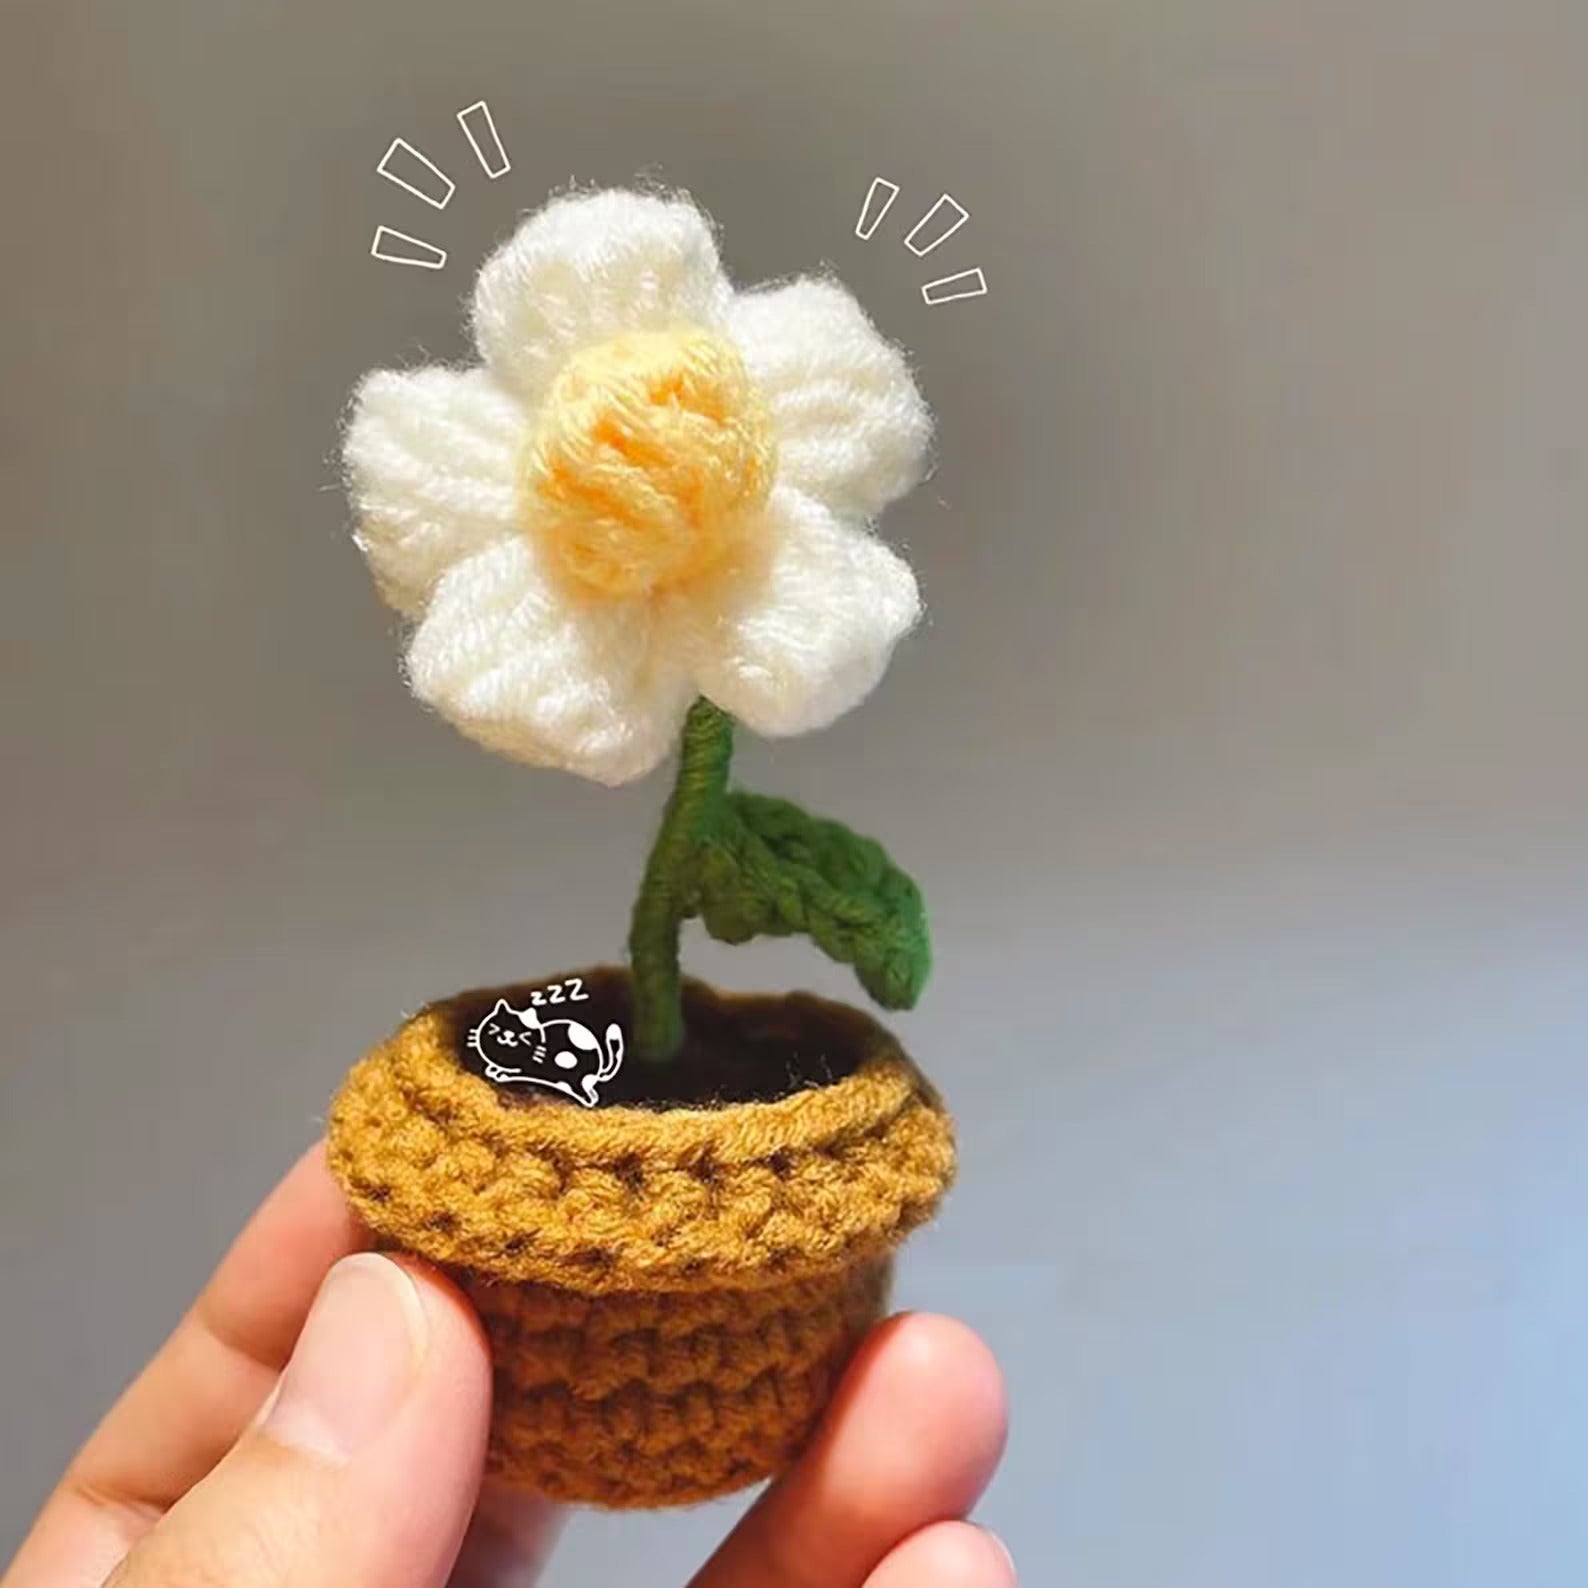 crocheted potted plants